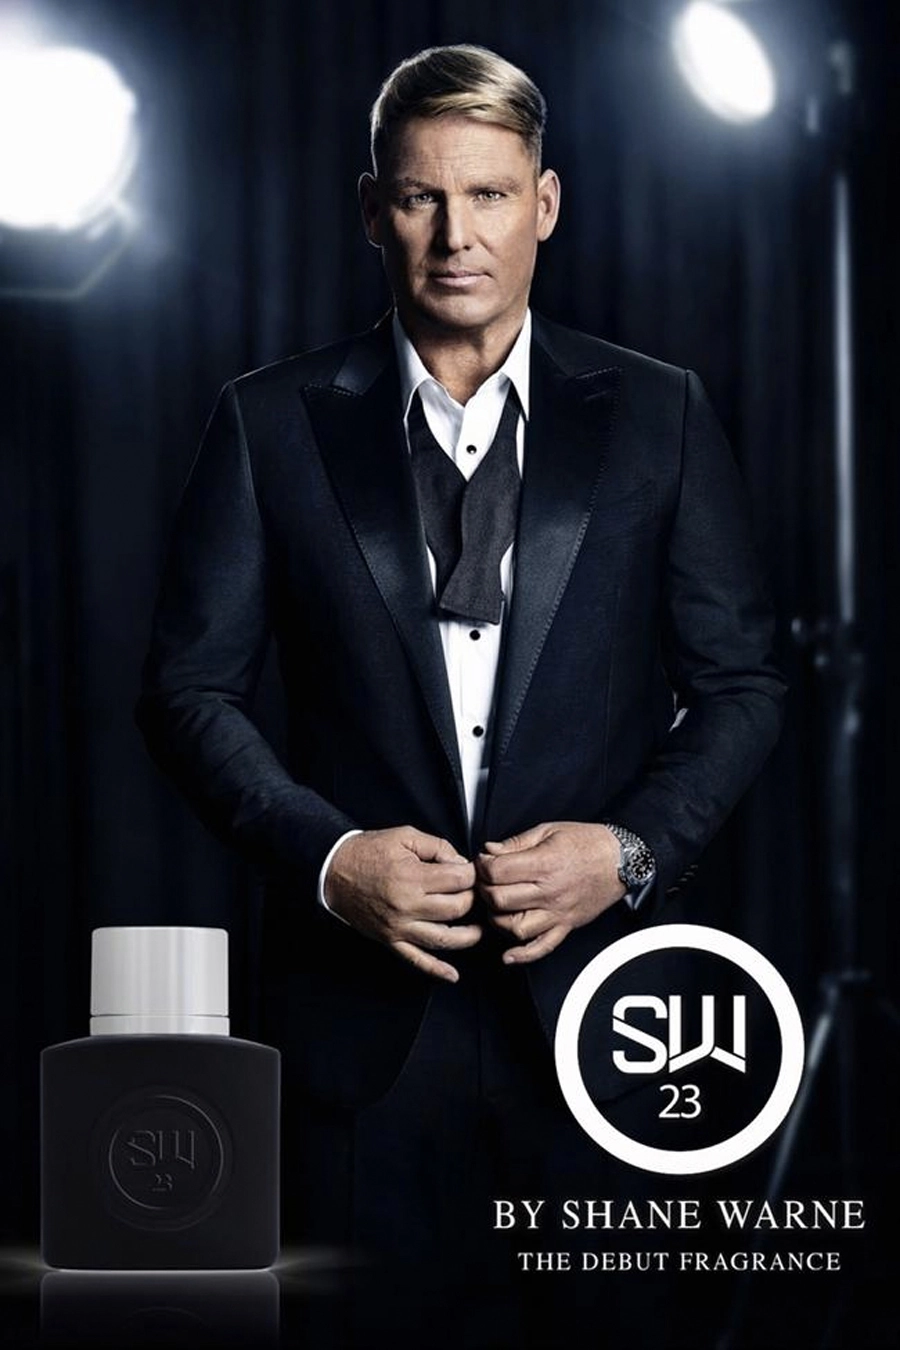 SW23 by Shane Warne Fragrance Is Launching This Week